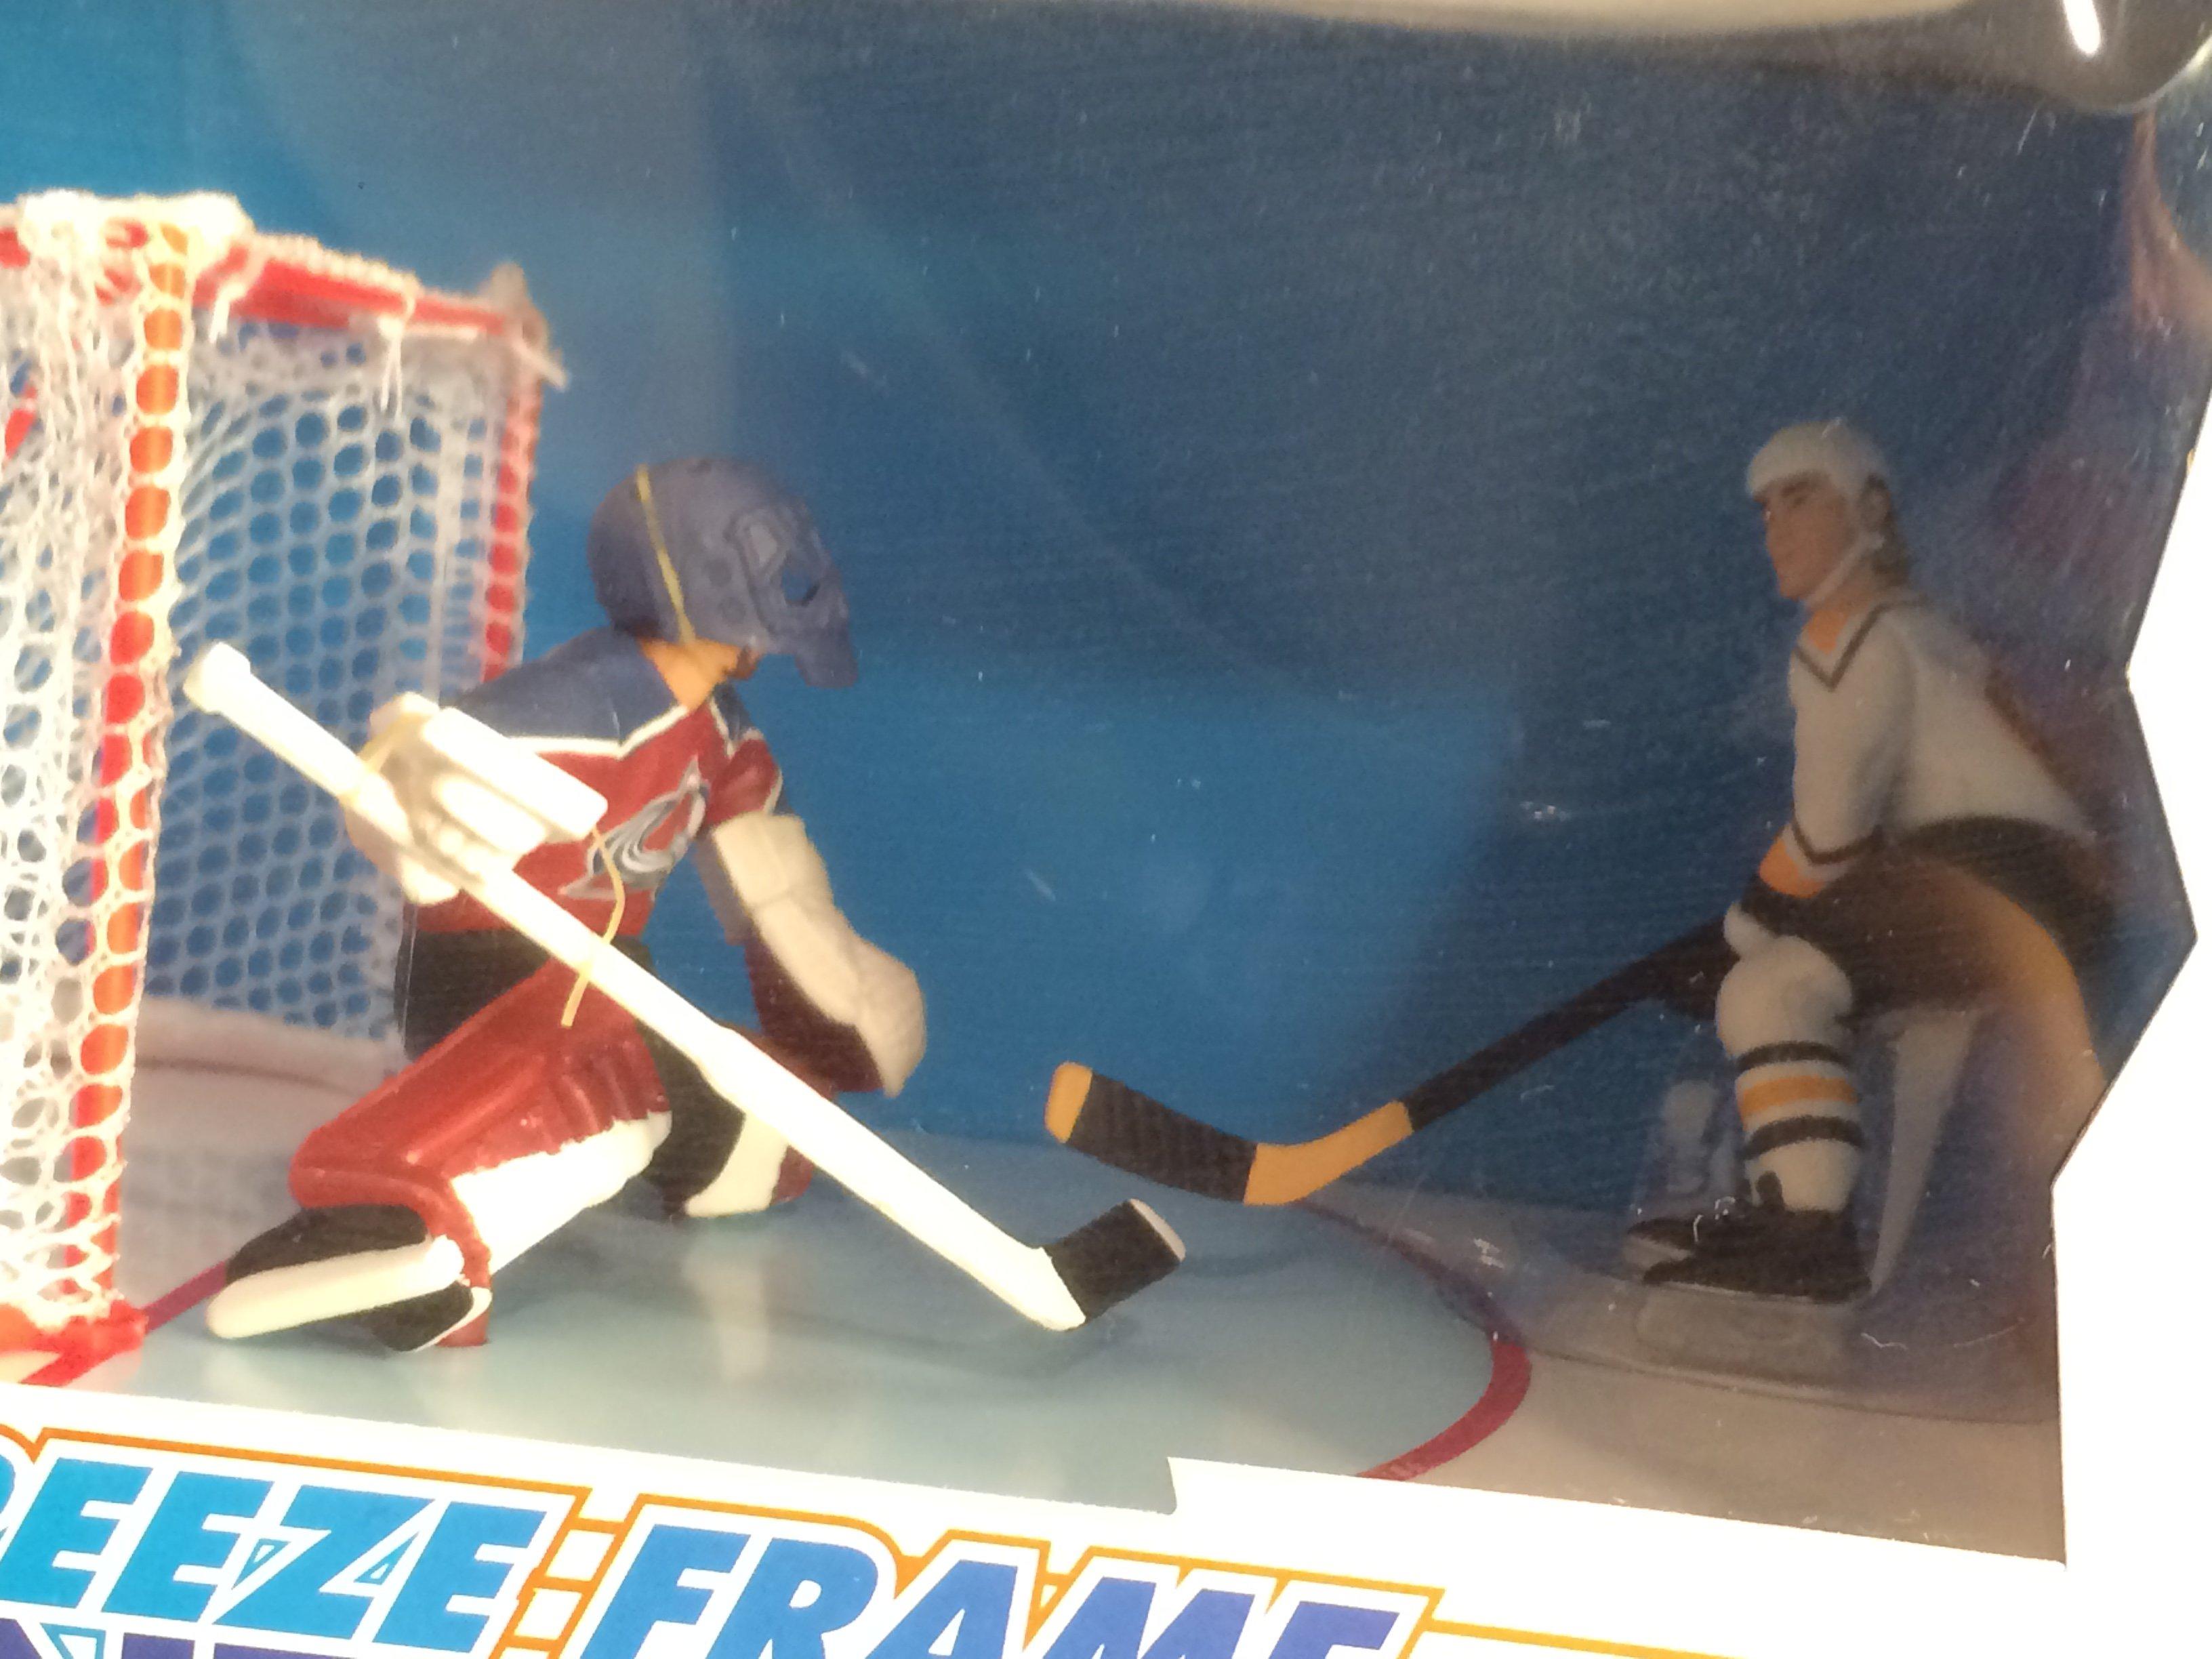 Collector NIP Starting Lineup Freeze Frame One On One Hockey Players Roy & Jagr 10" by 6.5"